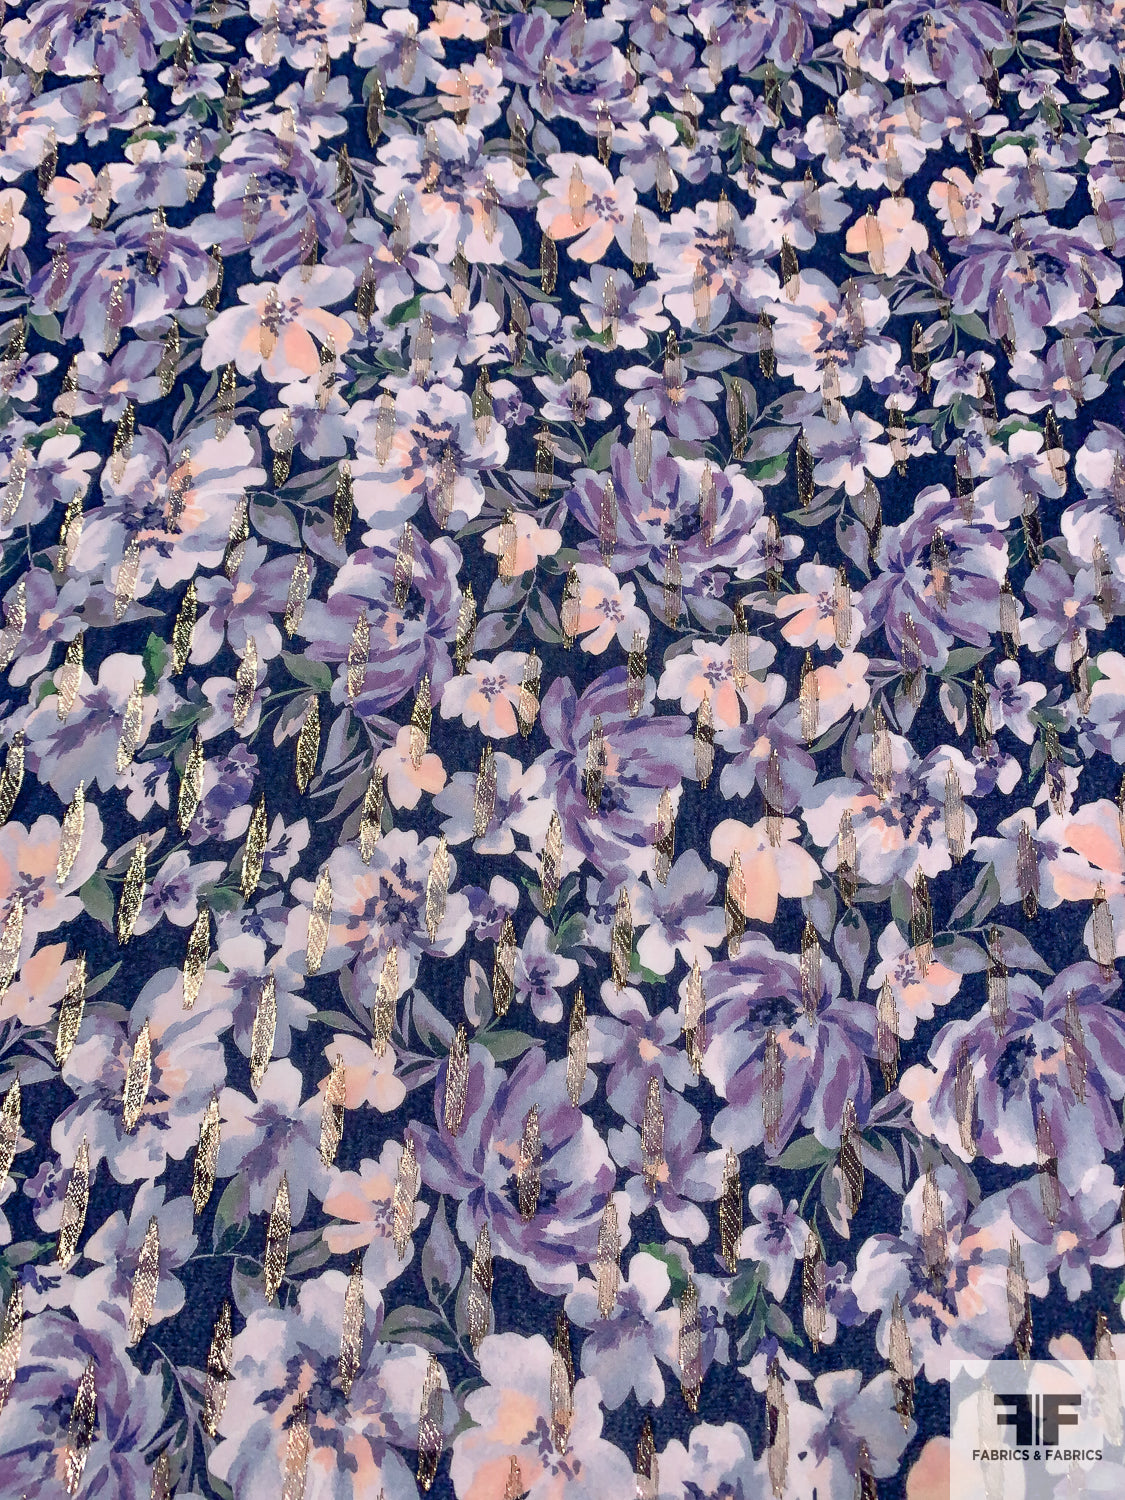 Floral Printed Georgette with Lurex Detailing - Navy / Lavender / Light Peach / Gold